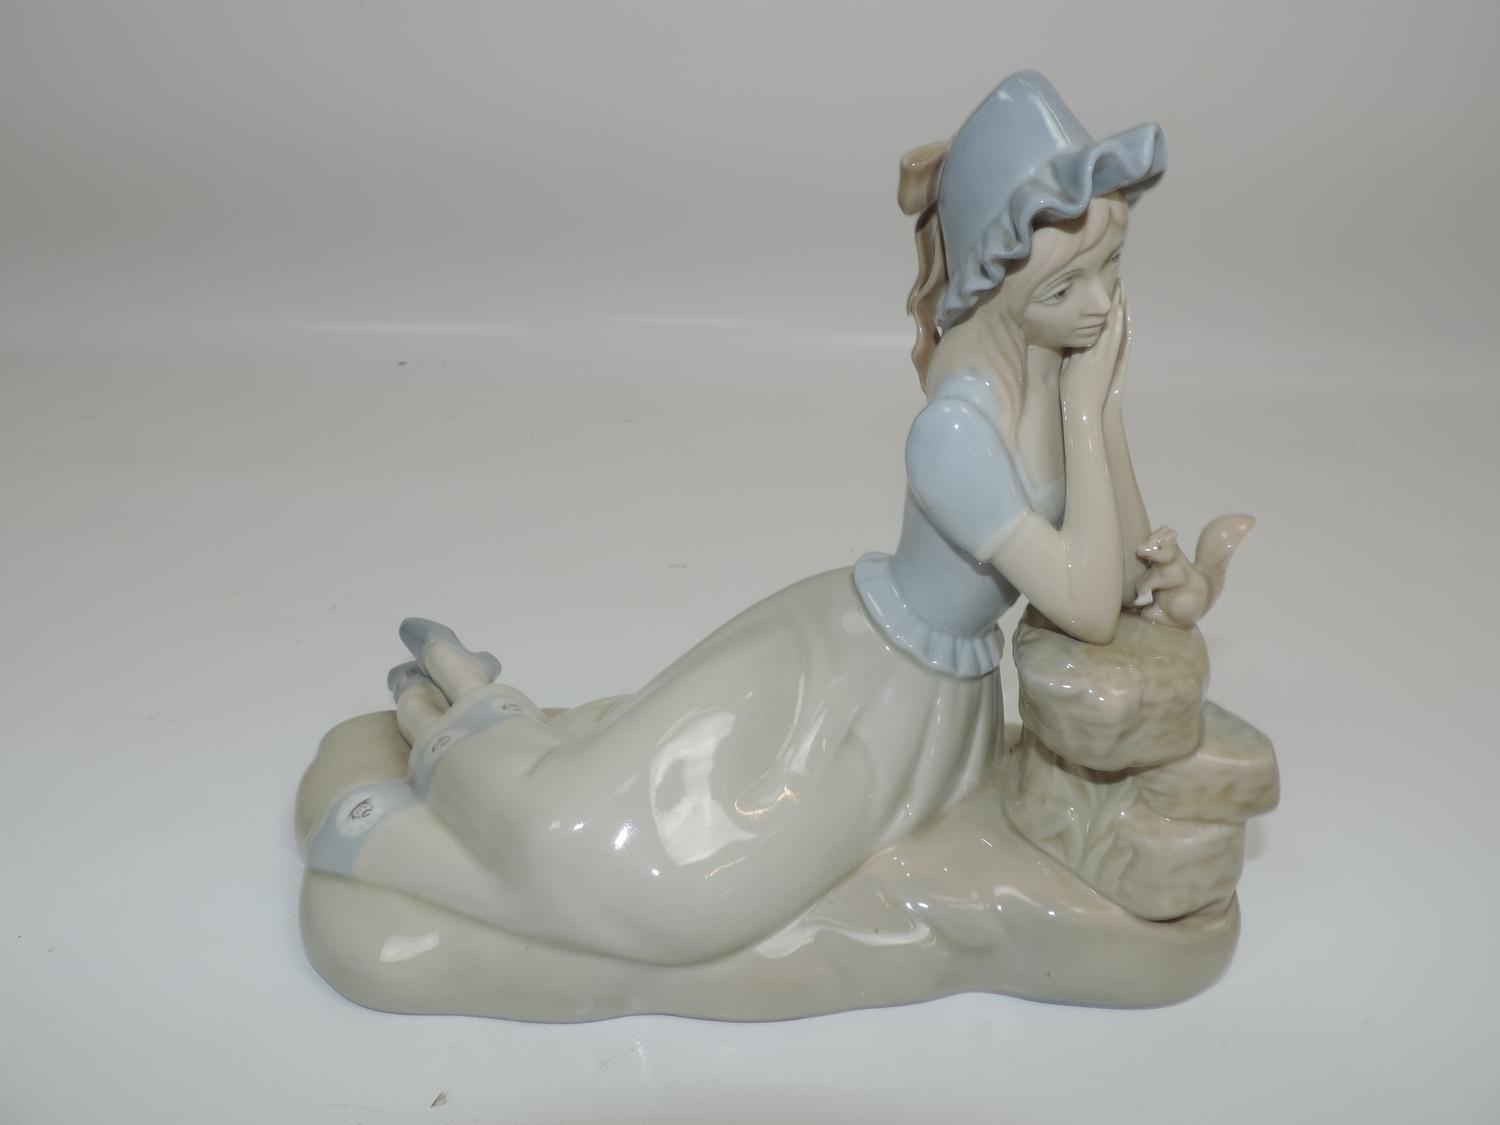 2x Spanish Porcelain Figures - One Miguel and Other Is Lladro (Hands Missing on Lladro) - Image 2 of 8